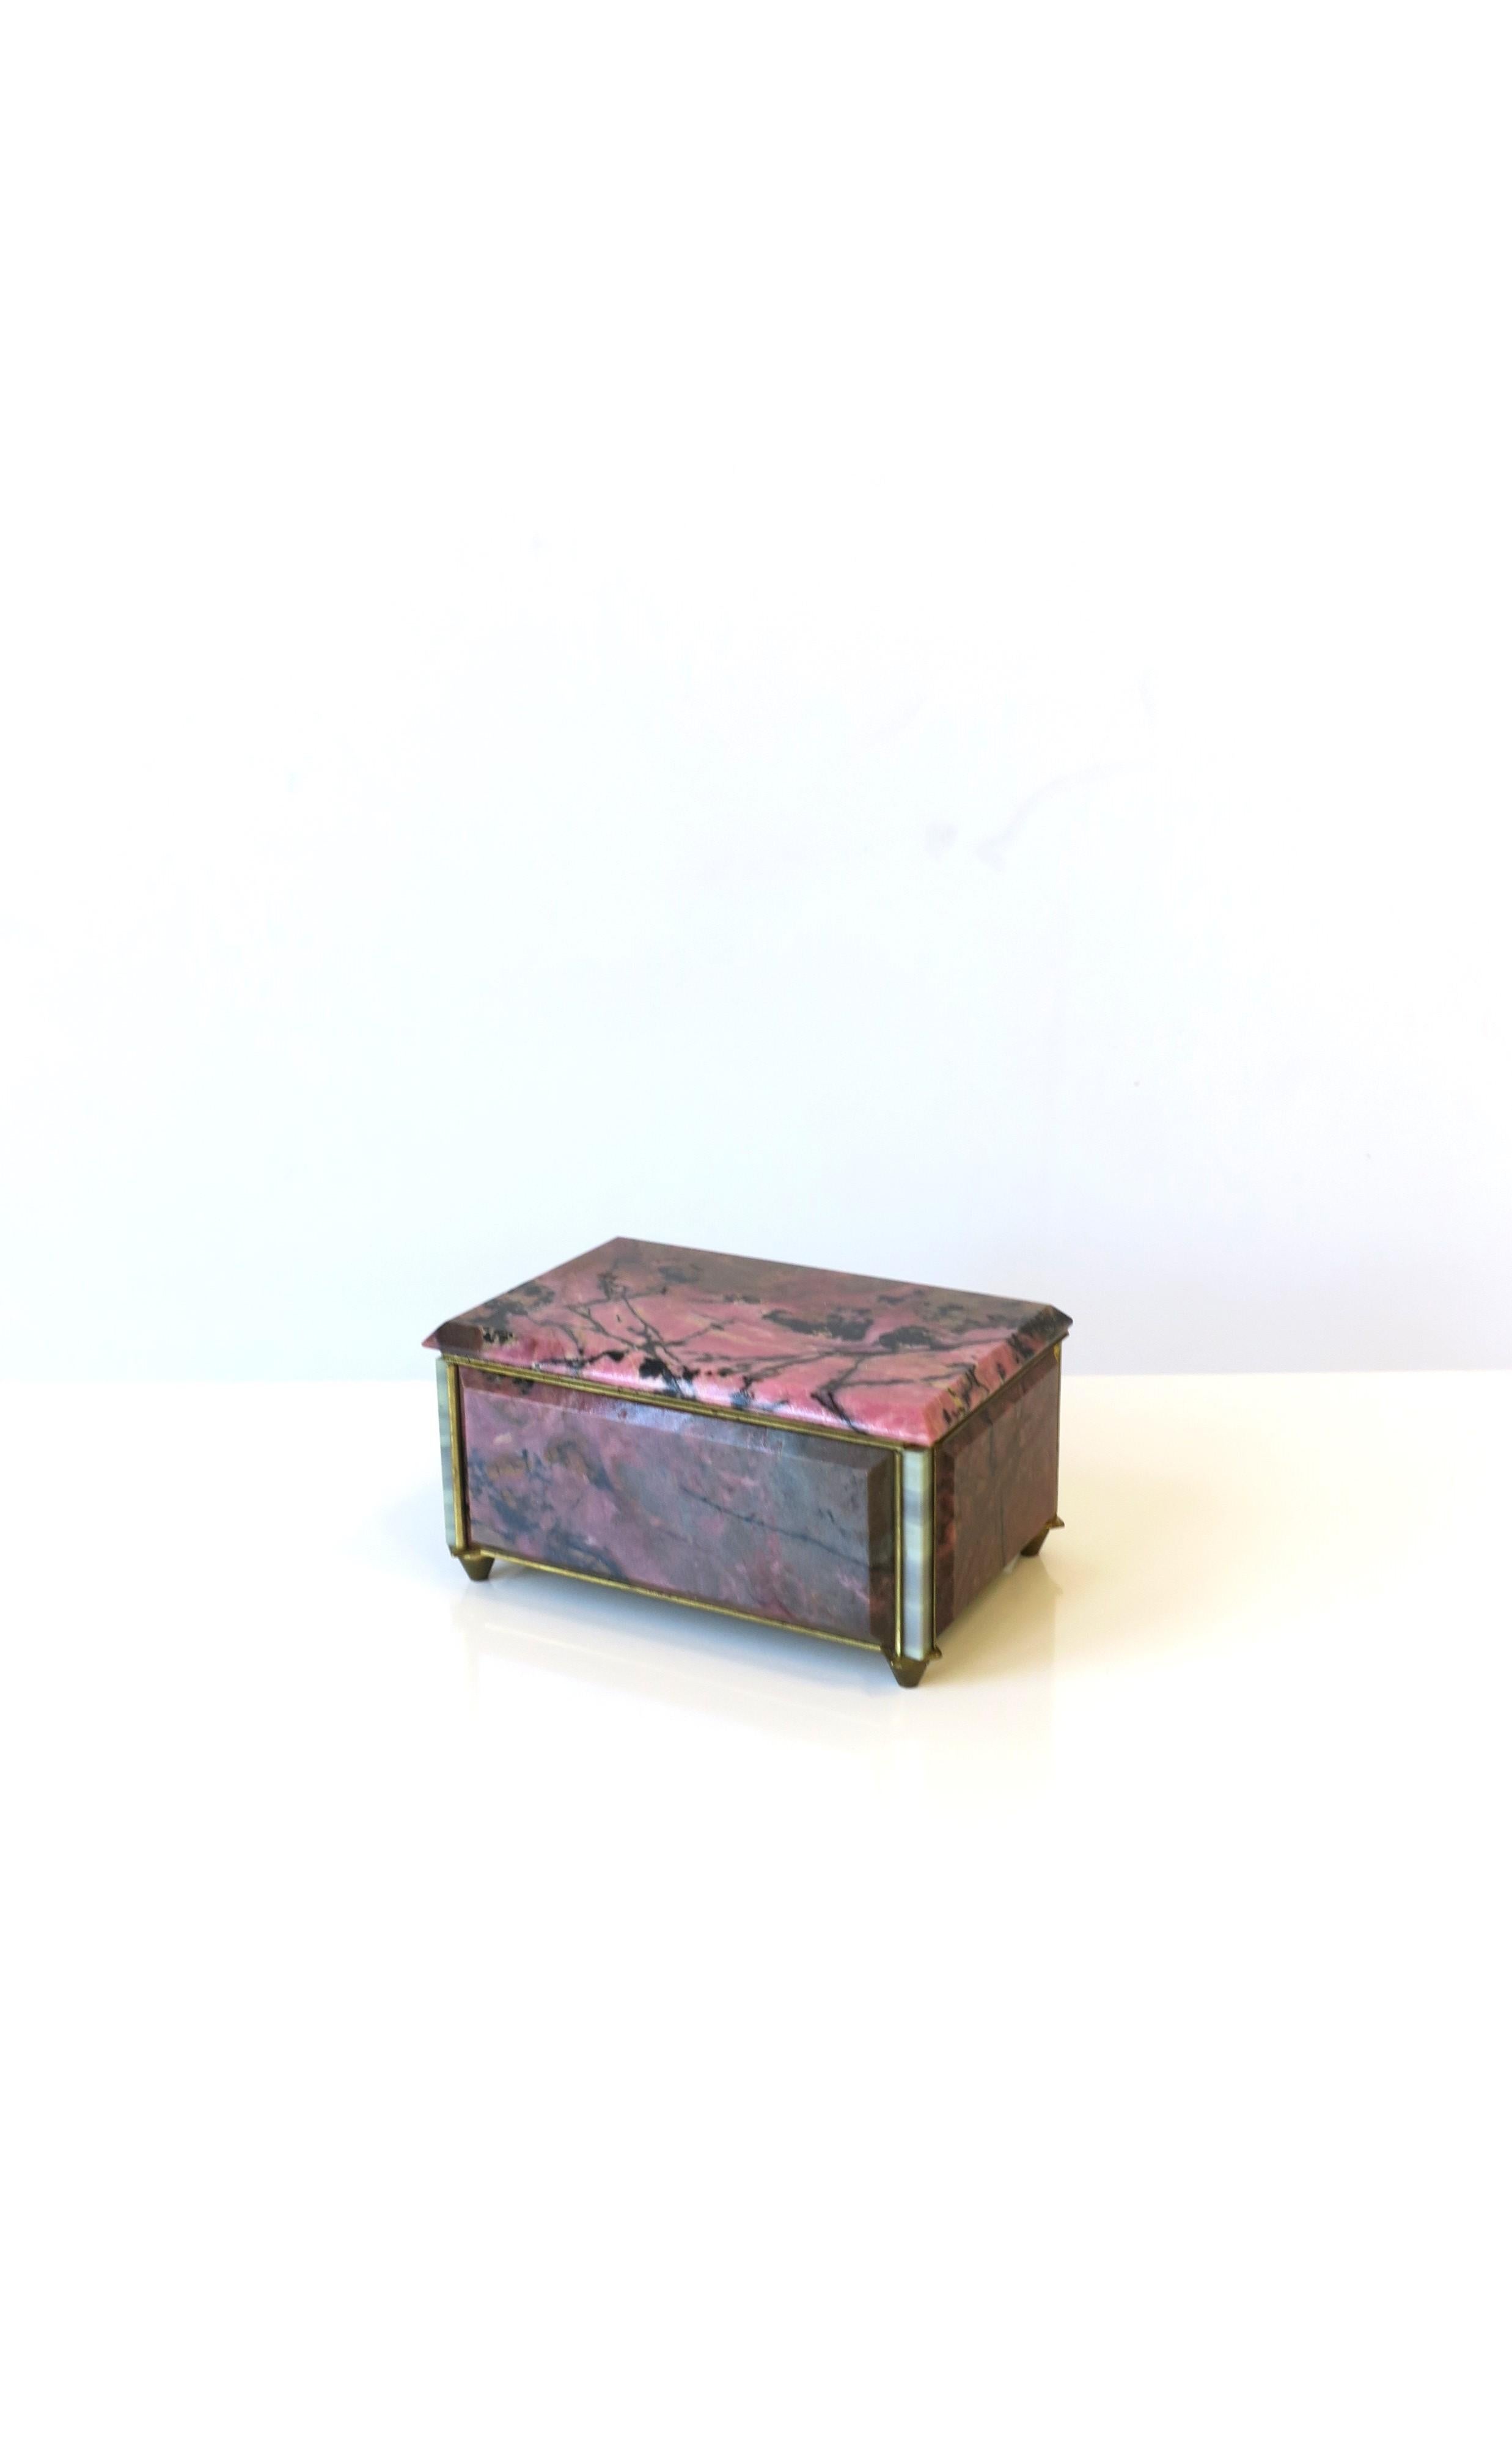 A very beautiful and rare pink and black rhodonite quartz jewelry box with bronze frame and a midnight blue velvet interior, circa early-20th century, Europe. Box is pink and black rhodonite with white onyx corners, embraced by a bronze frame,